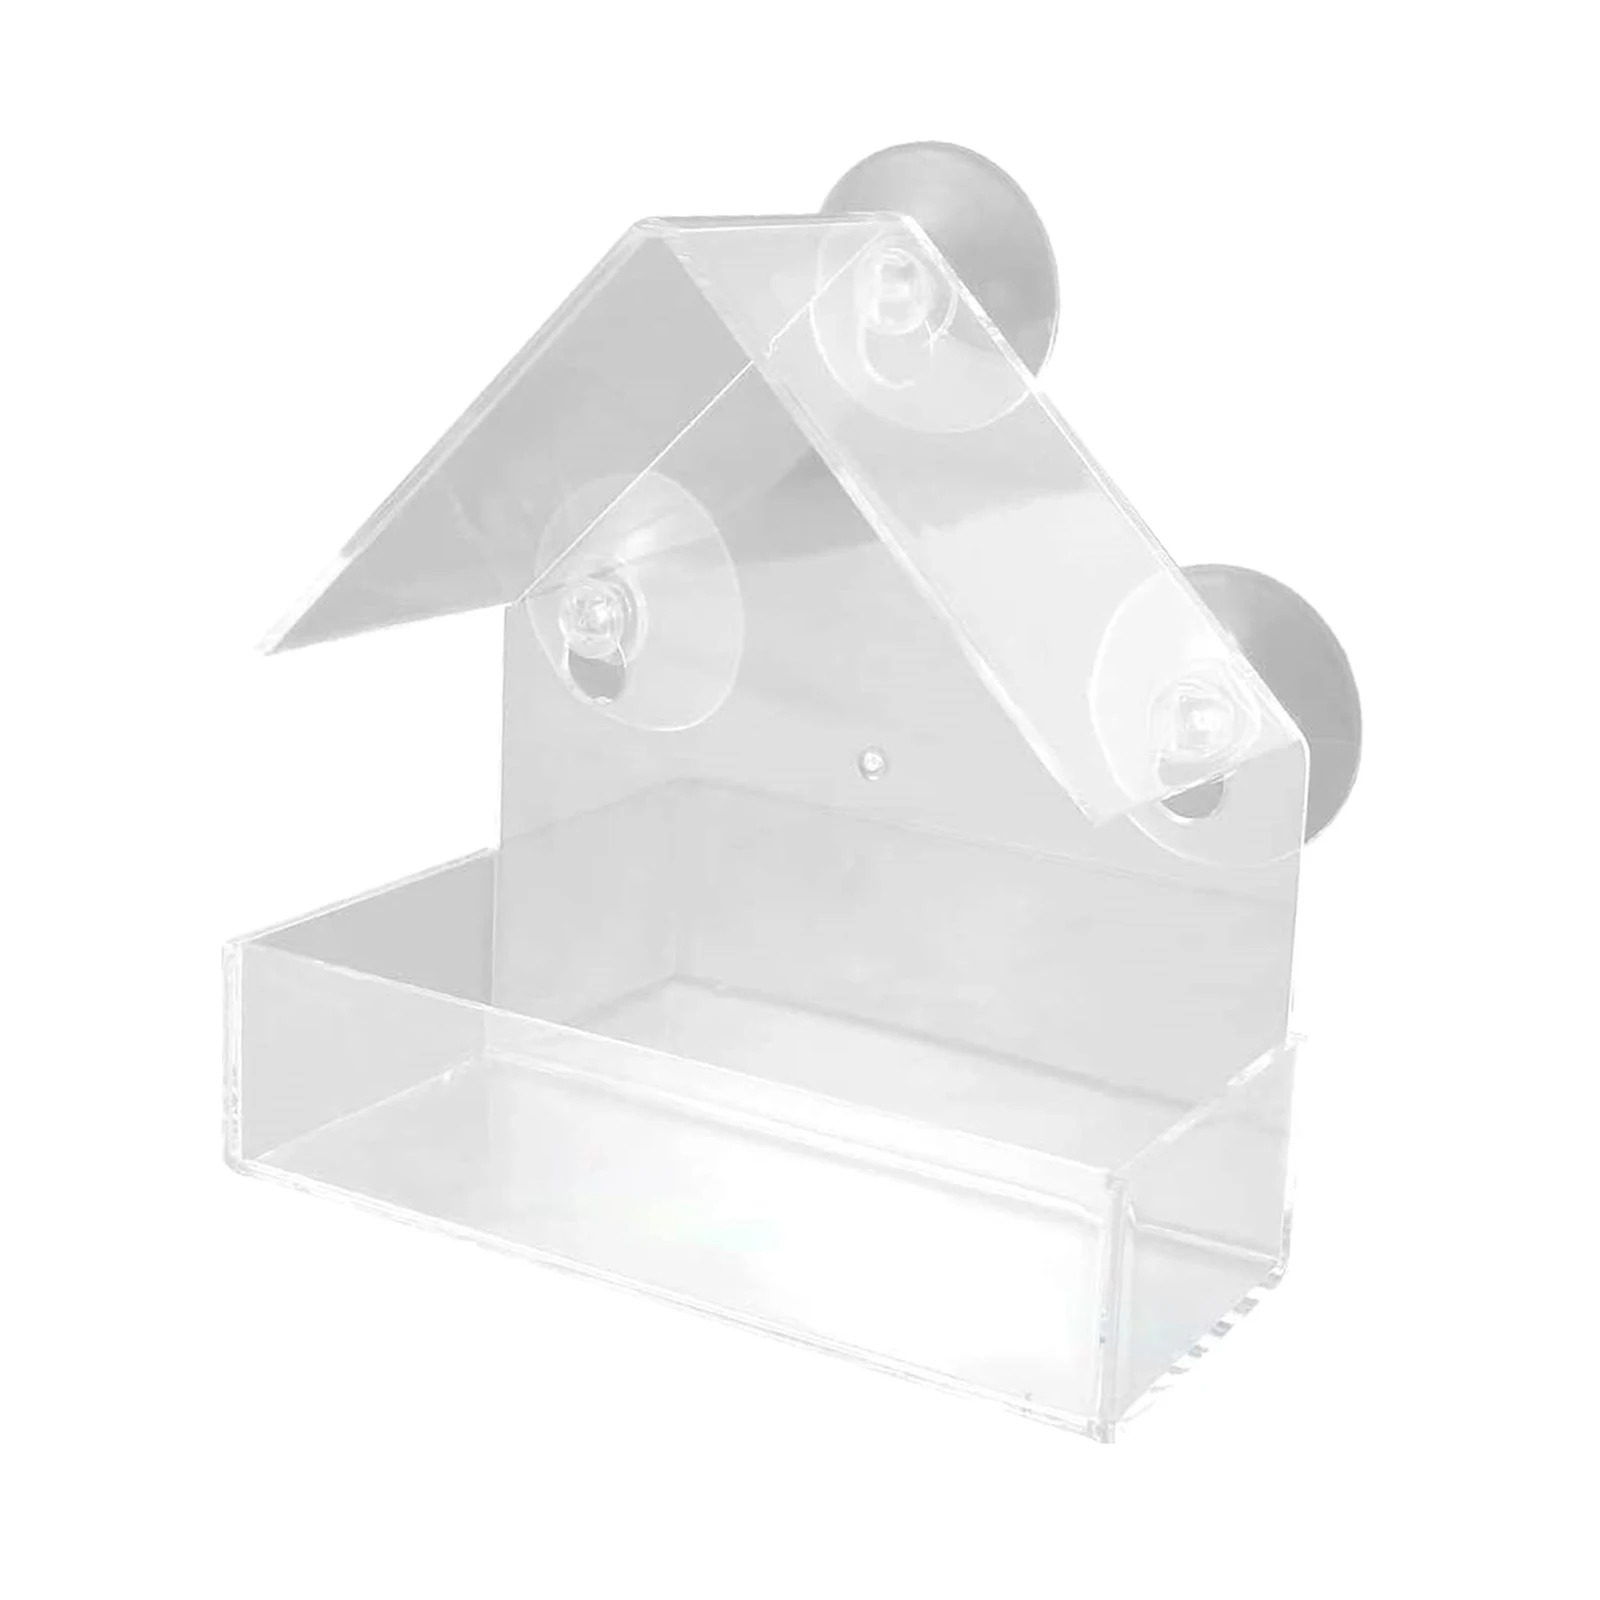 Window Bird Feeder - with 3 Strong Suction Cups - Bird Seed Tray - Bird House Bird Feeders for Outside - Gift for Kids